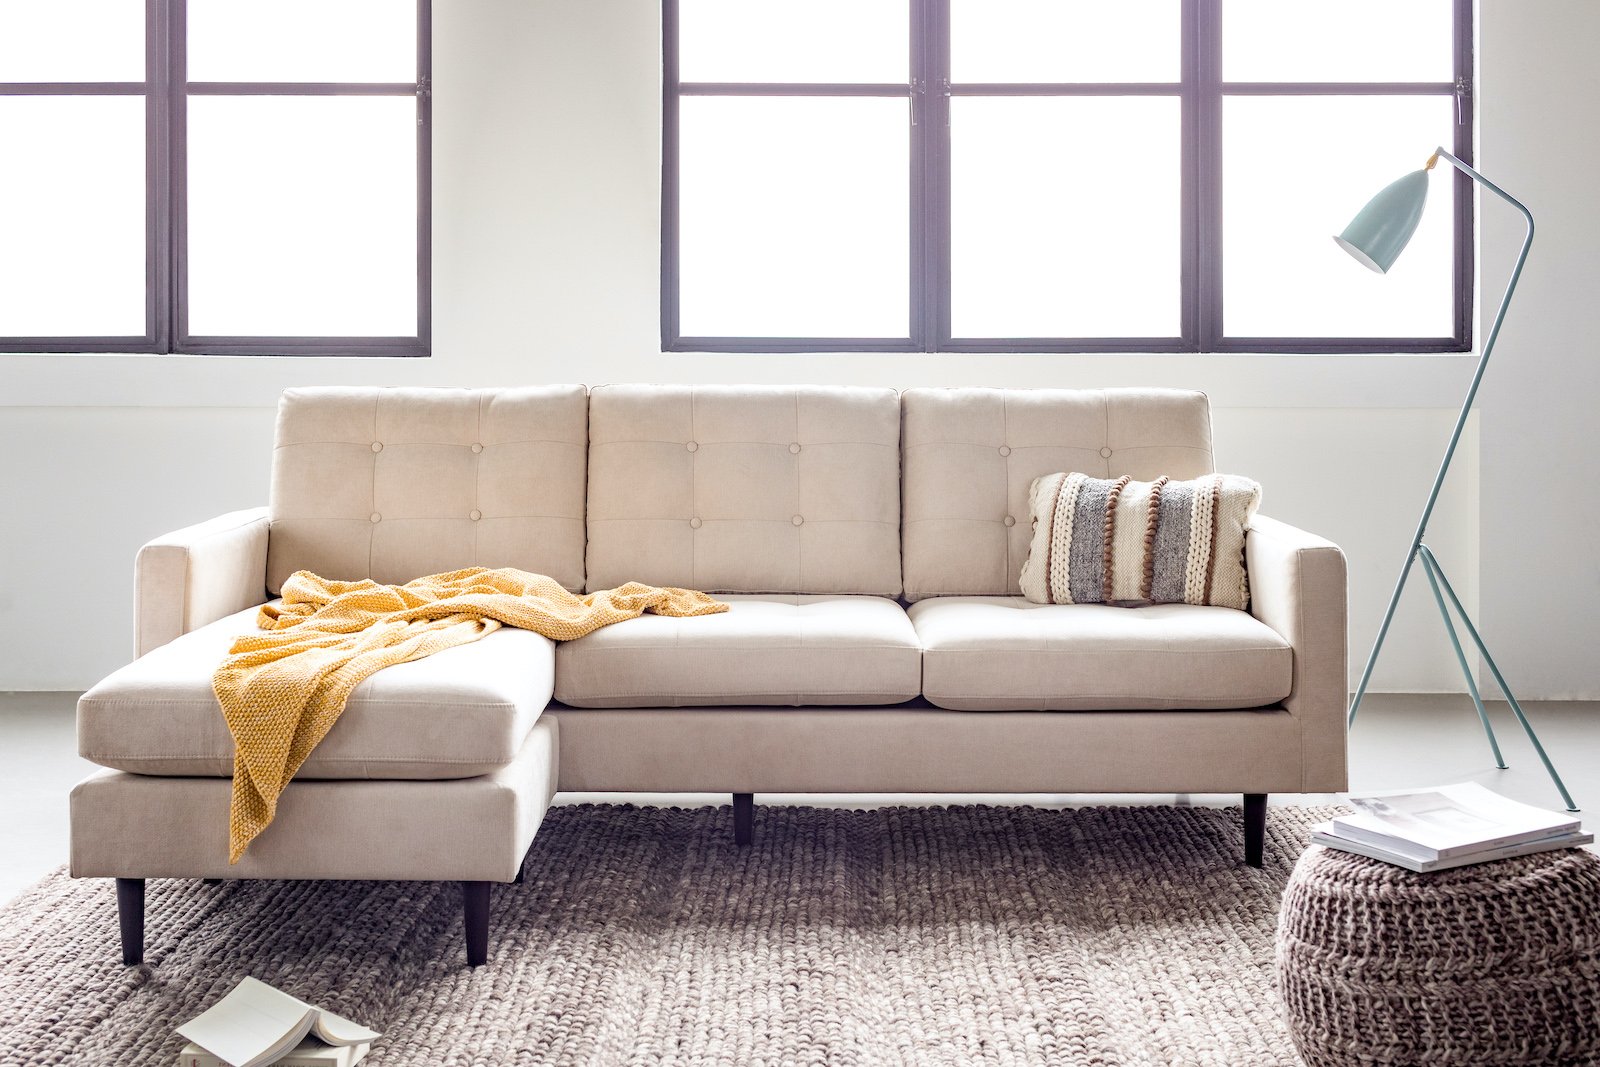 How To Clean Fabric Sofas: Guide To A Brand New-Looking Couch - Noa Home